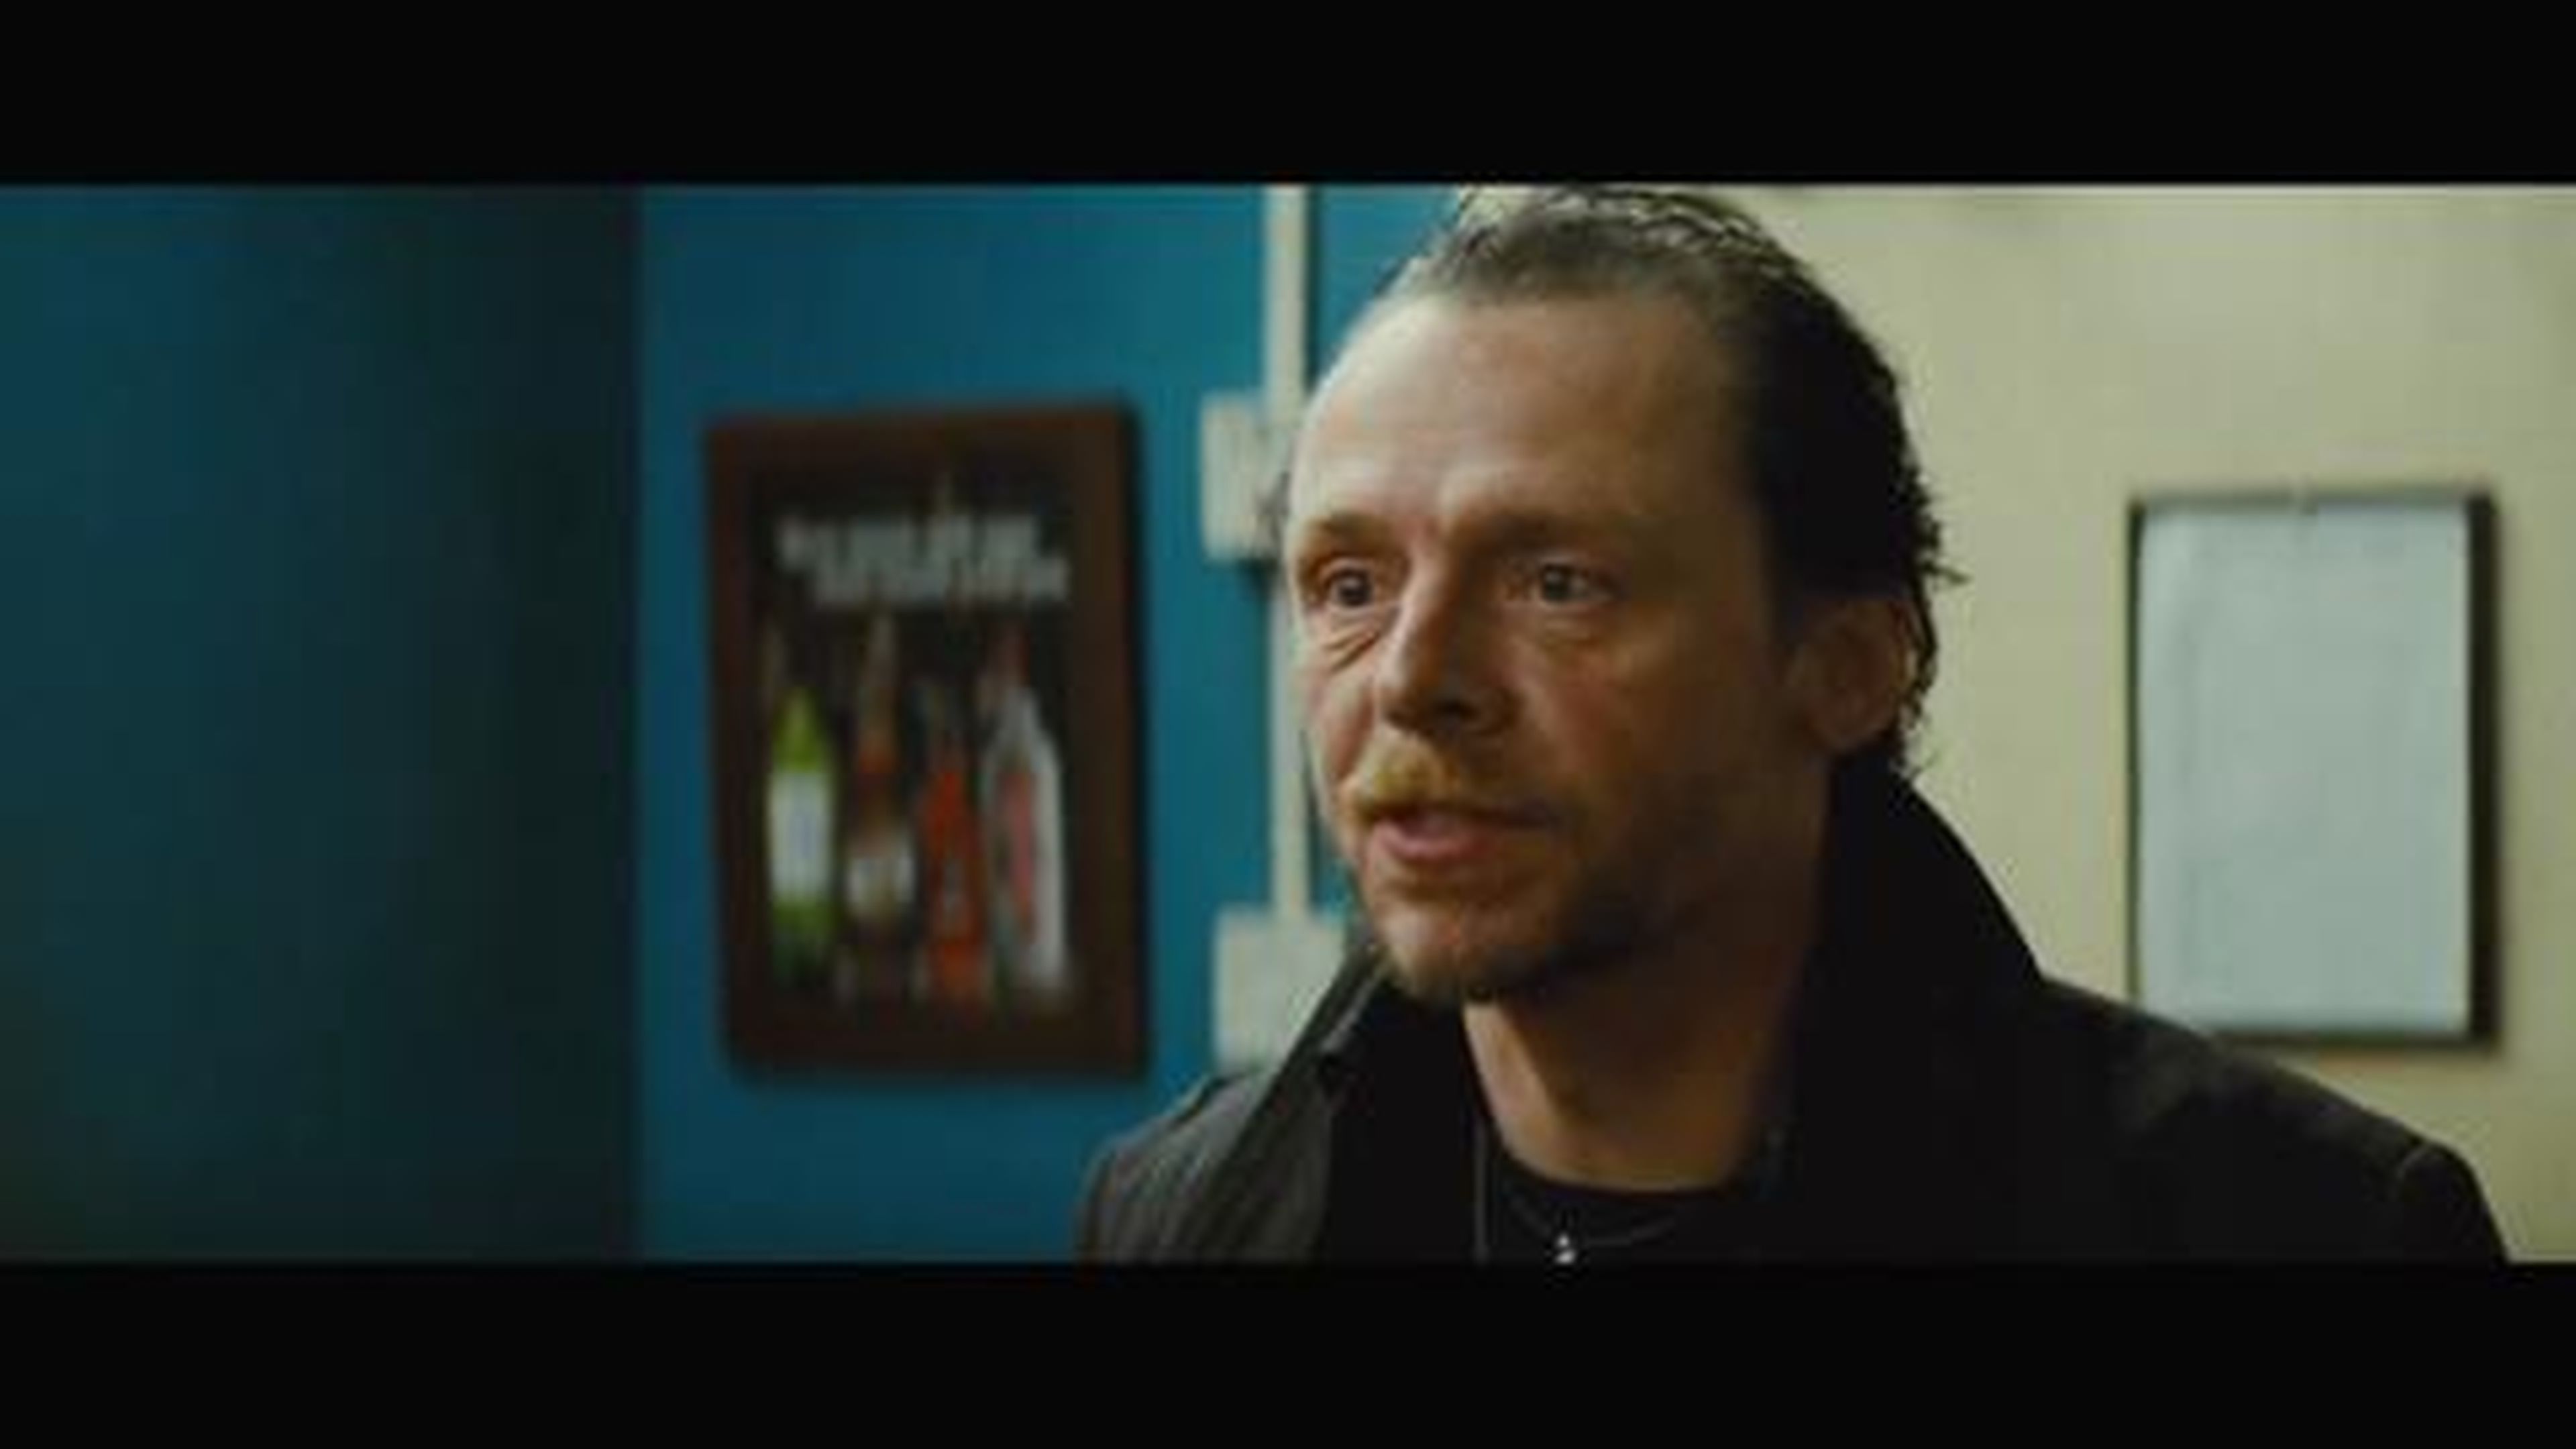 THE WORLD'S END - OFFICIAL TRAILER